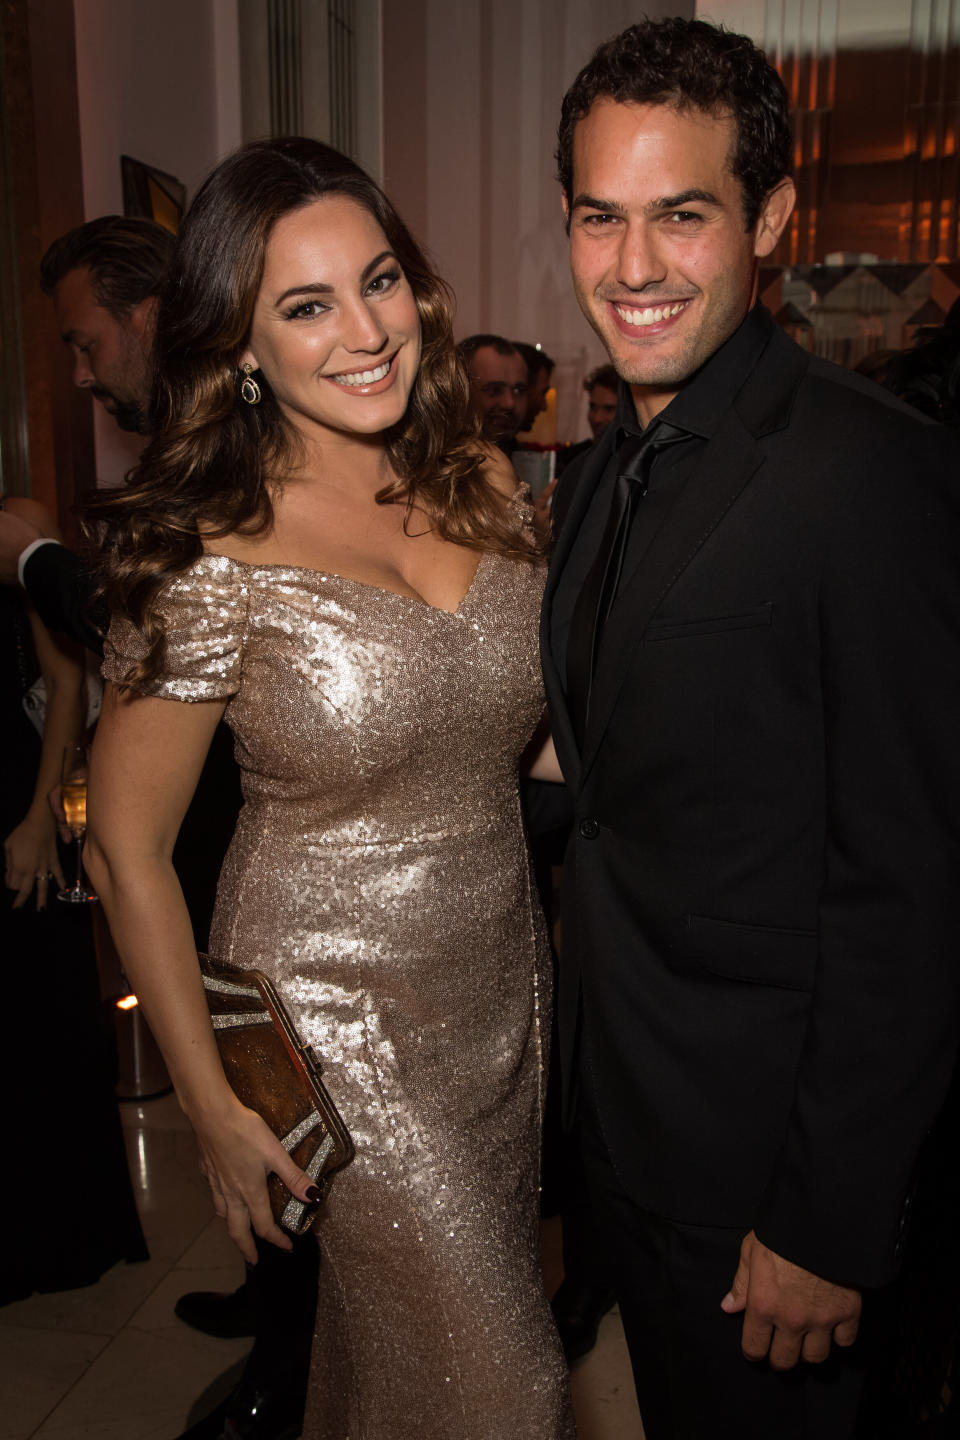 Model Kelly Brook and Jeremy Parisi attend the 'Brilliant is Beautiful' fund raiser dinner organized by the NGO Artists for Peace and Justice, in London, Sunday, Oct. 9, 2016. (Photo by Vianney Le Caer/Invision/AP)